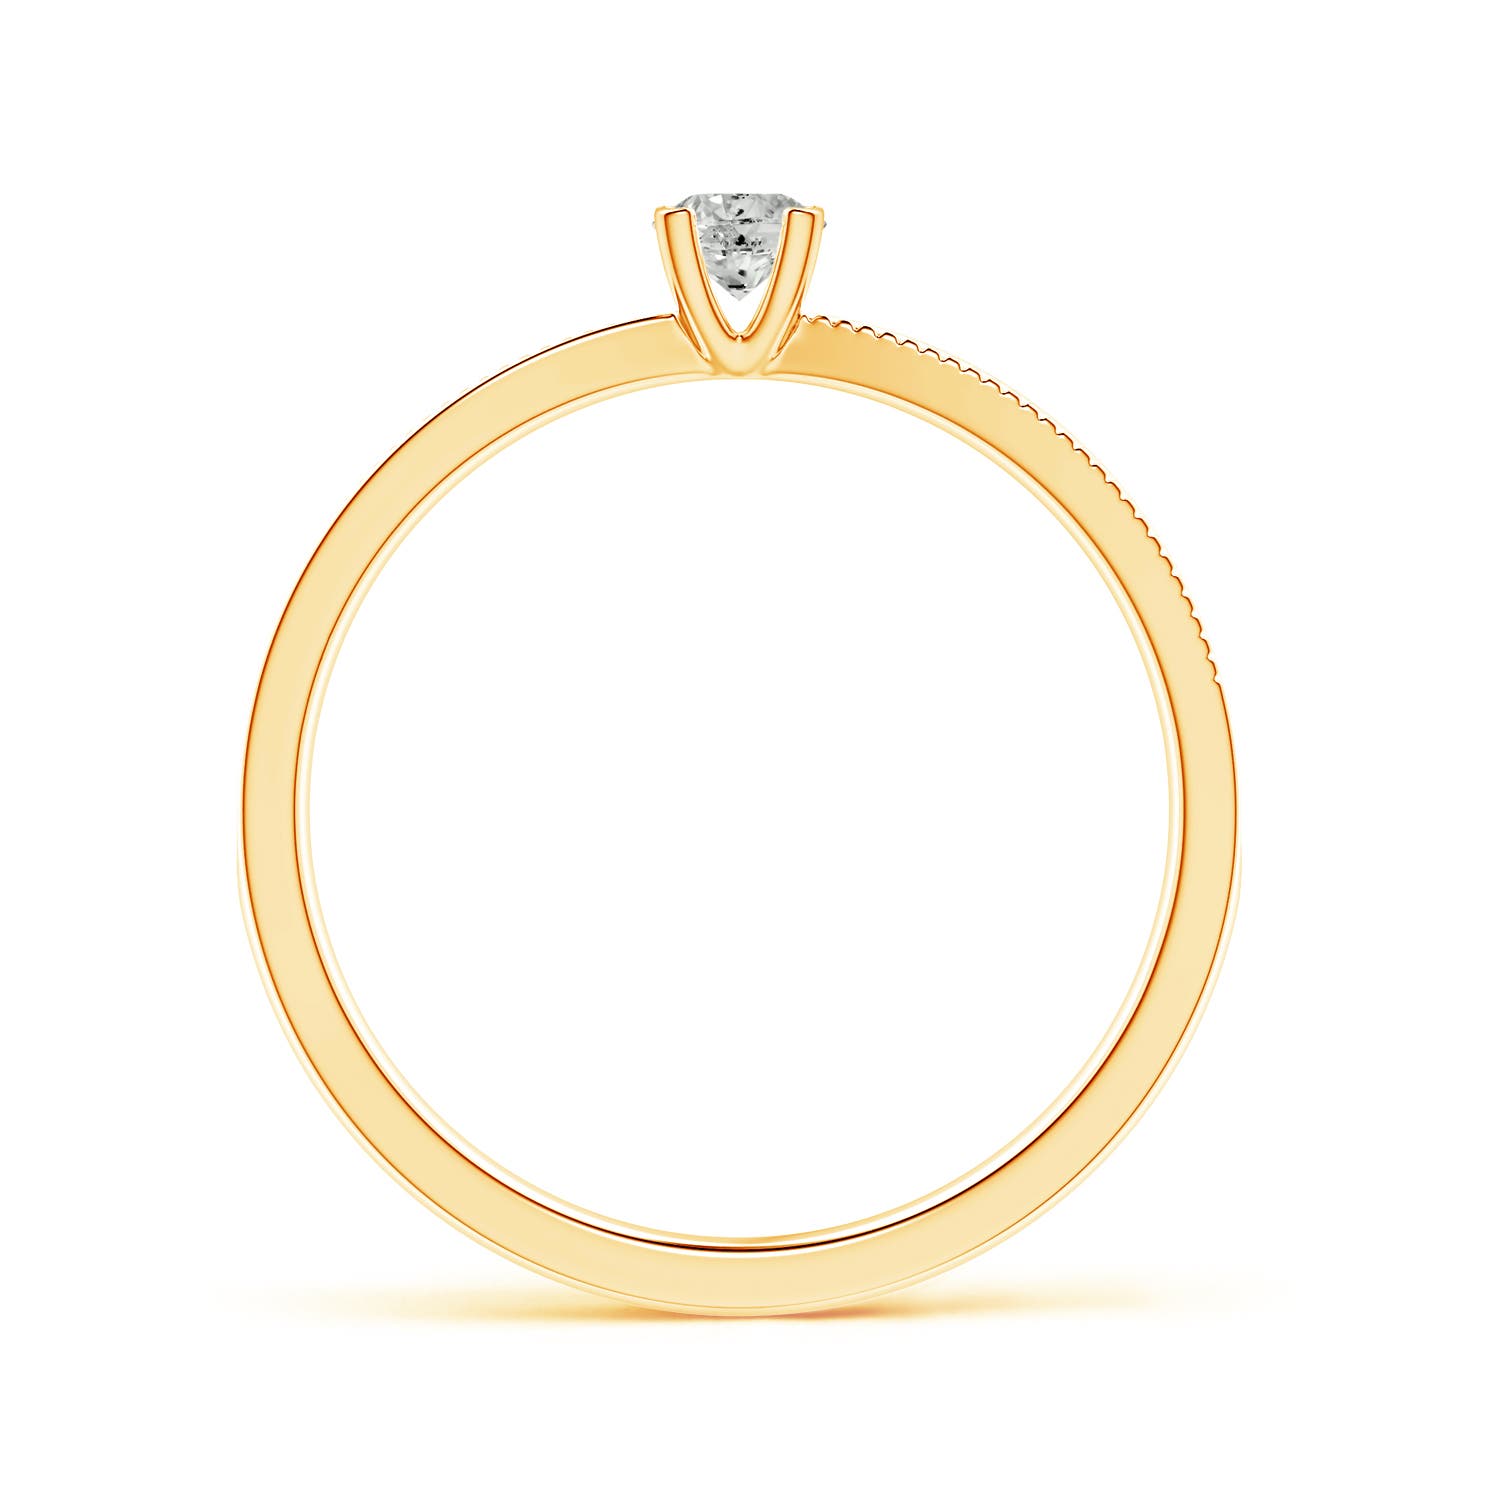 K, I3 / 0.16 CT / 14 KT Yellow Gold